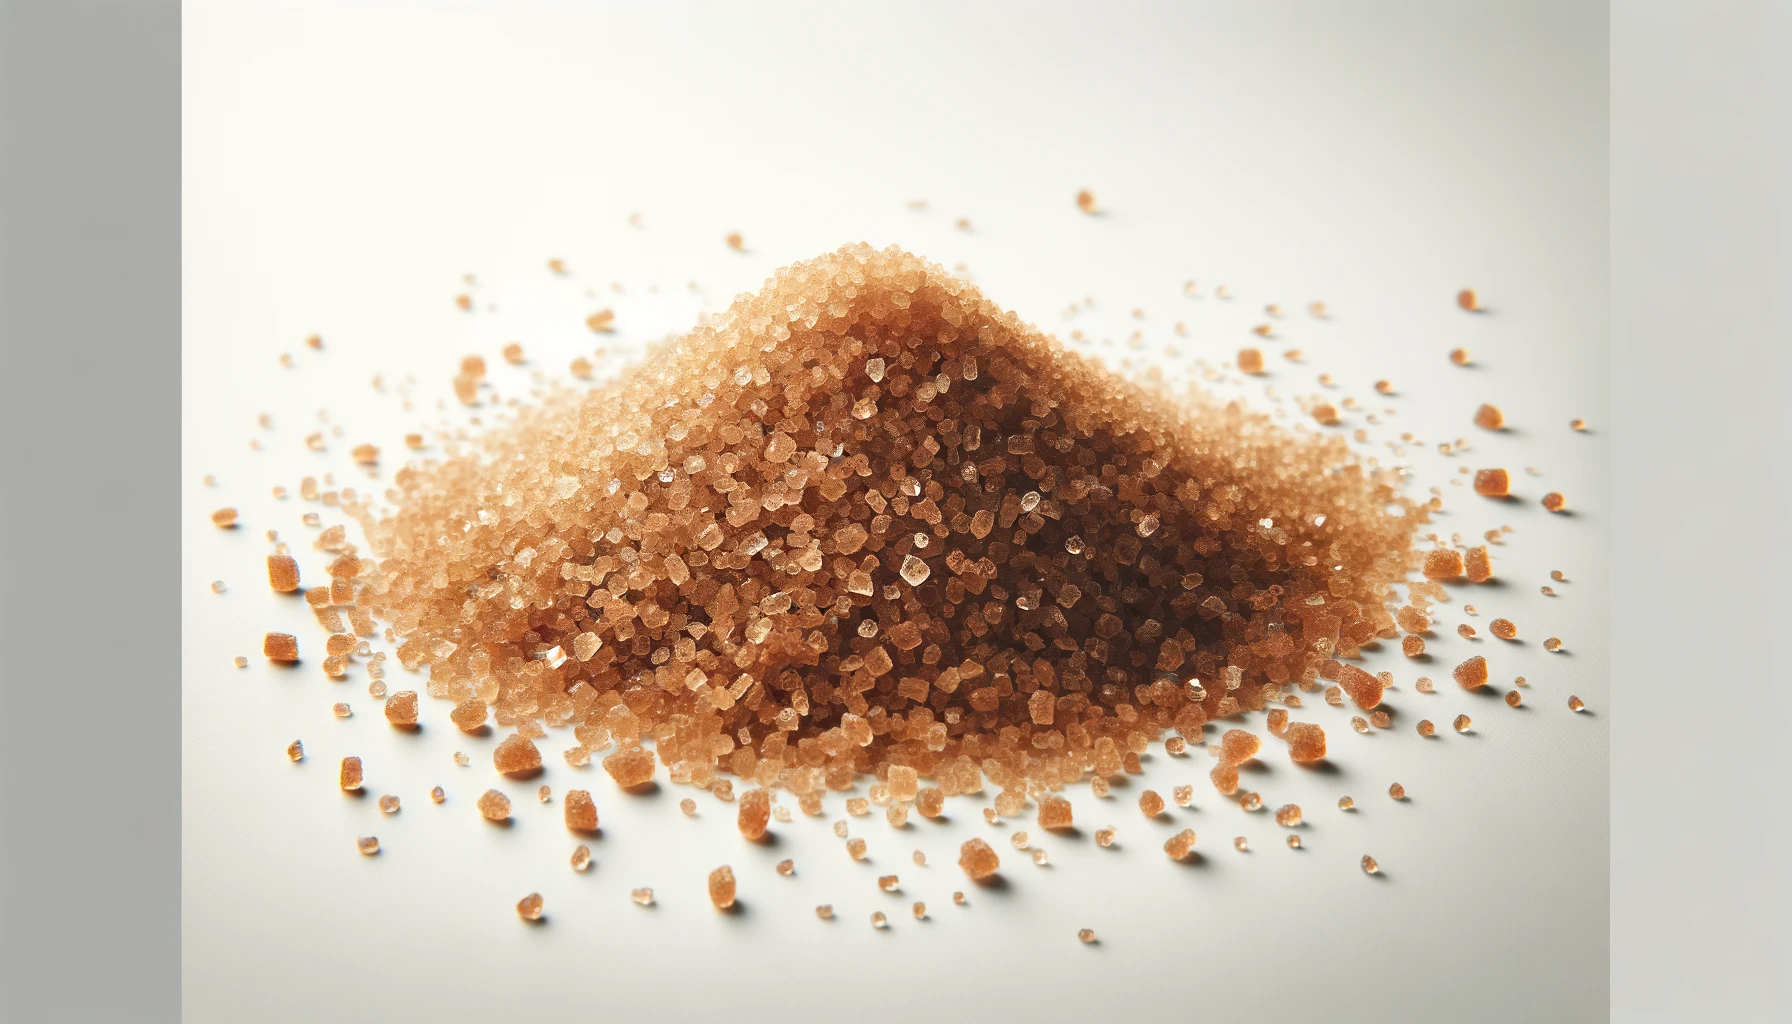 DALL·E 2024-03-26 11.33.48 - Create an image of a heap of granulated brown sugar scattered on a white surface. The granules should have a sparkling crystalline appearance with a g